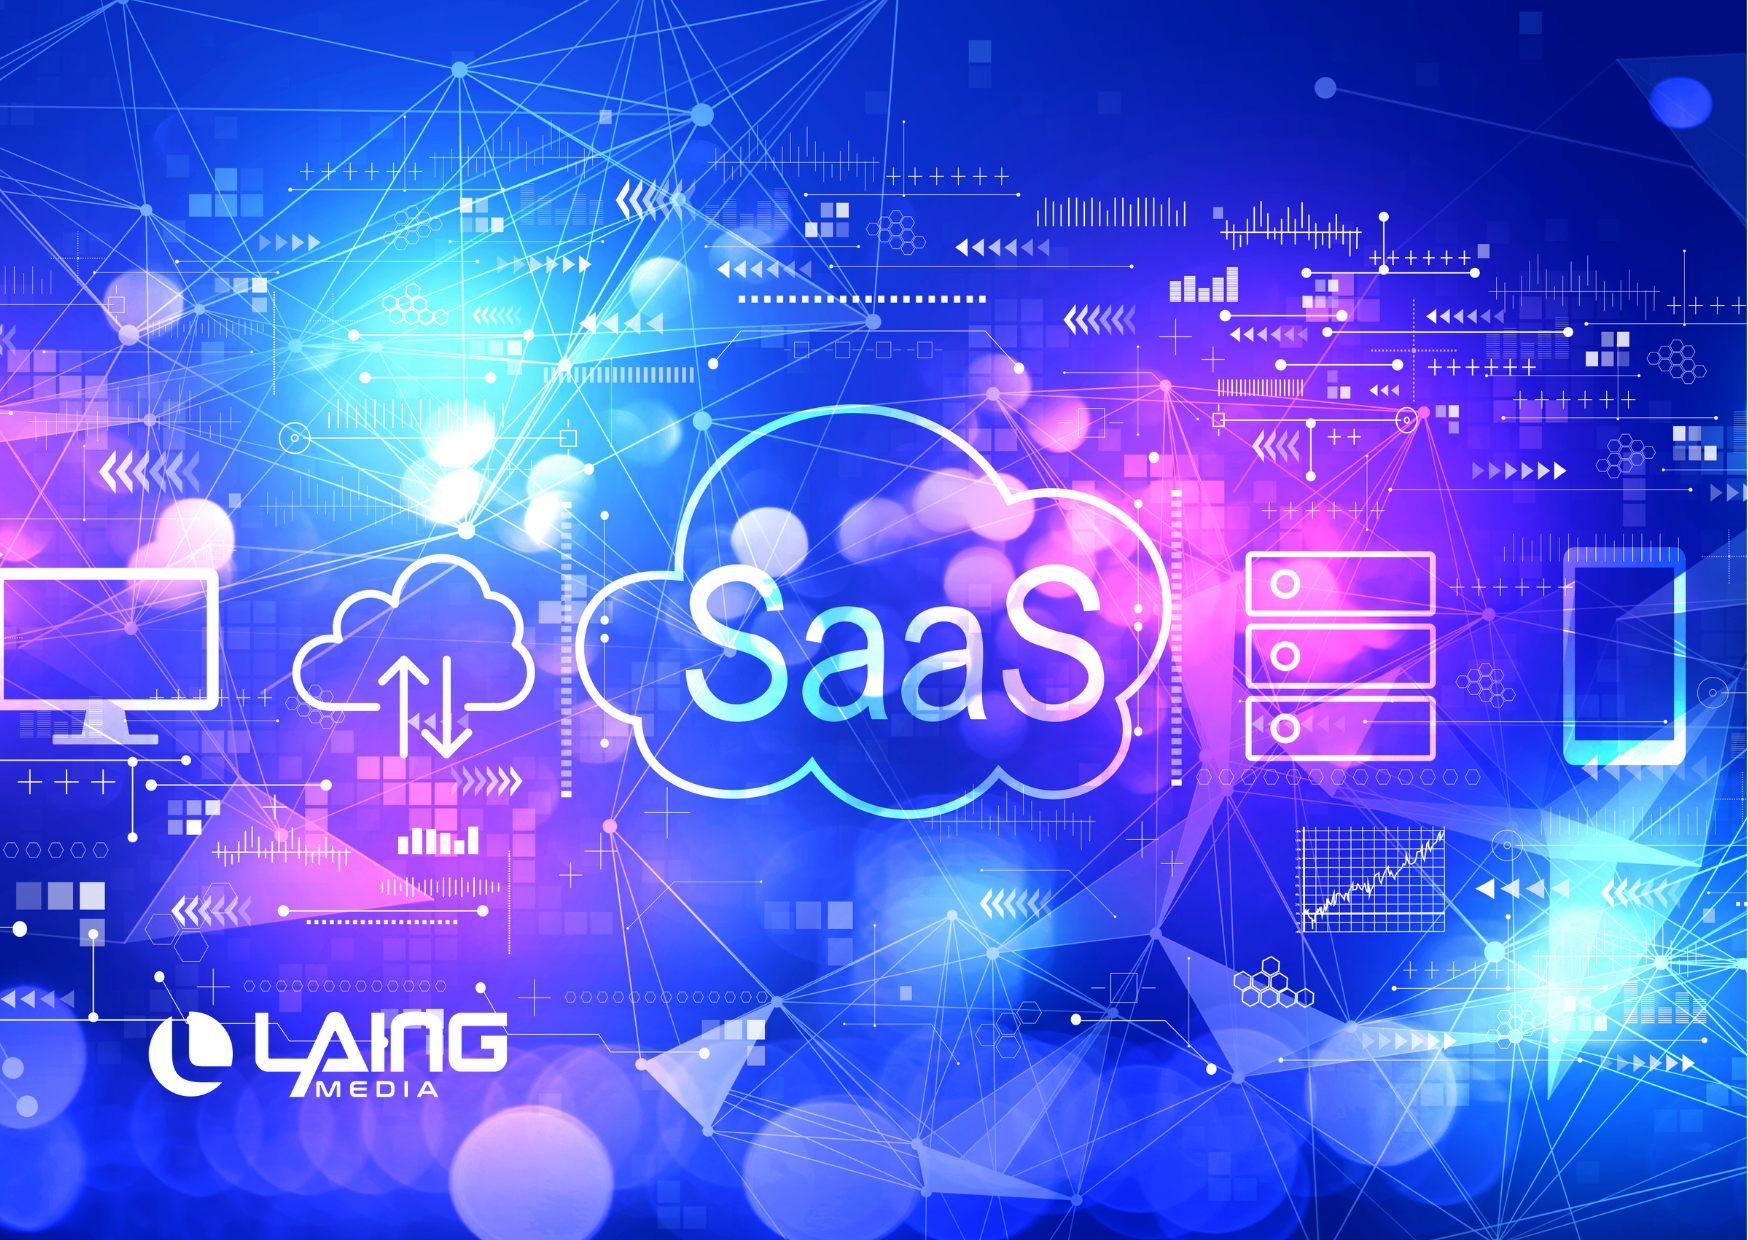 The word "SaaS" in a cloud floating in the inter web with Laing Media logo